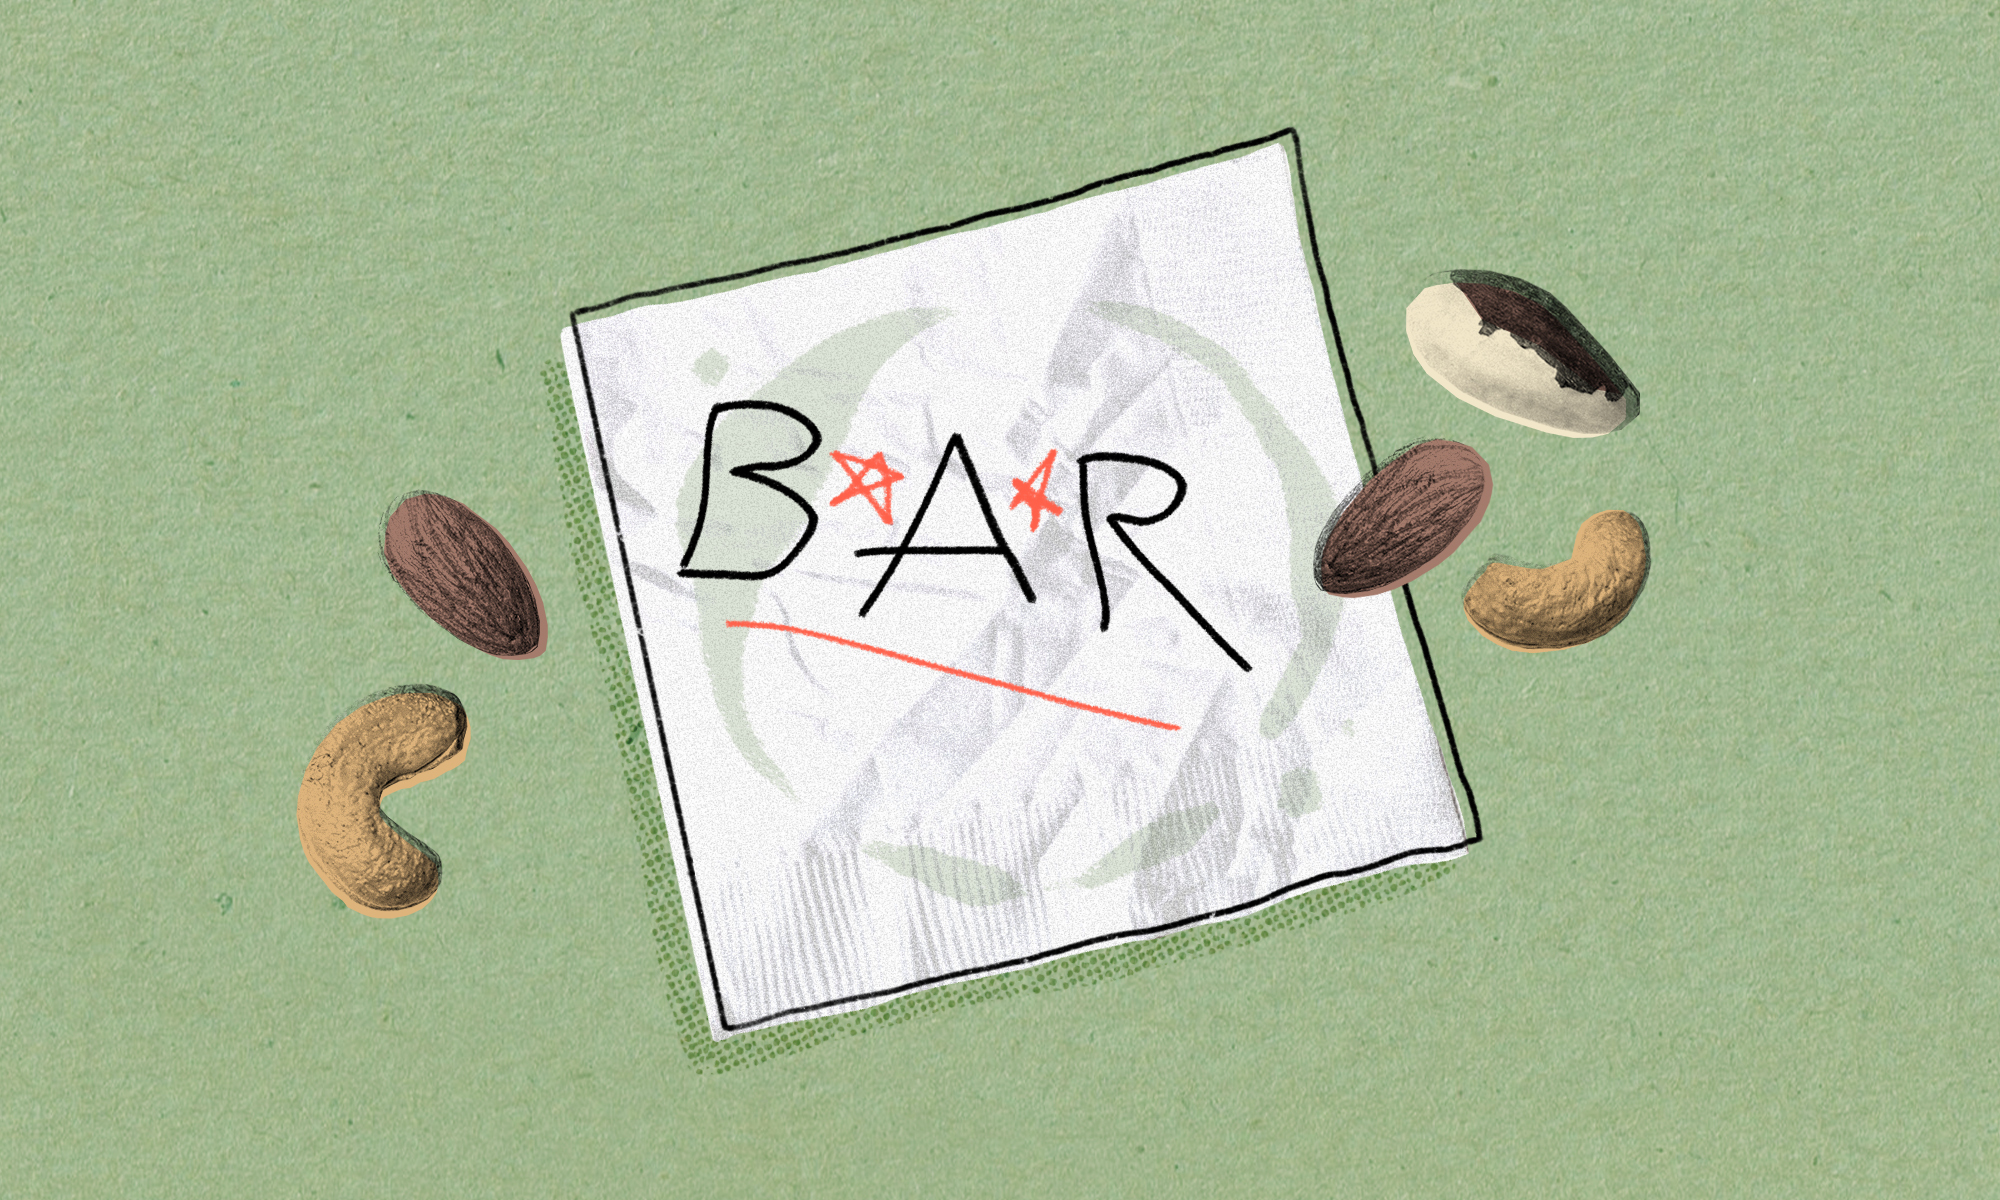 a bar napkin with “B * A * R*” written on it, surrounded with some loose mixed nuts